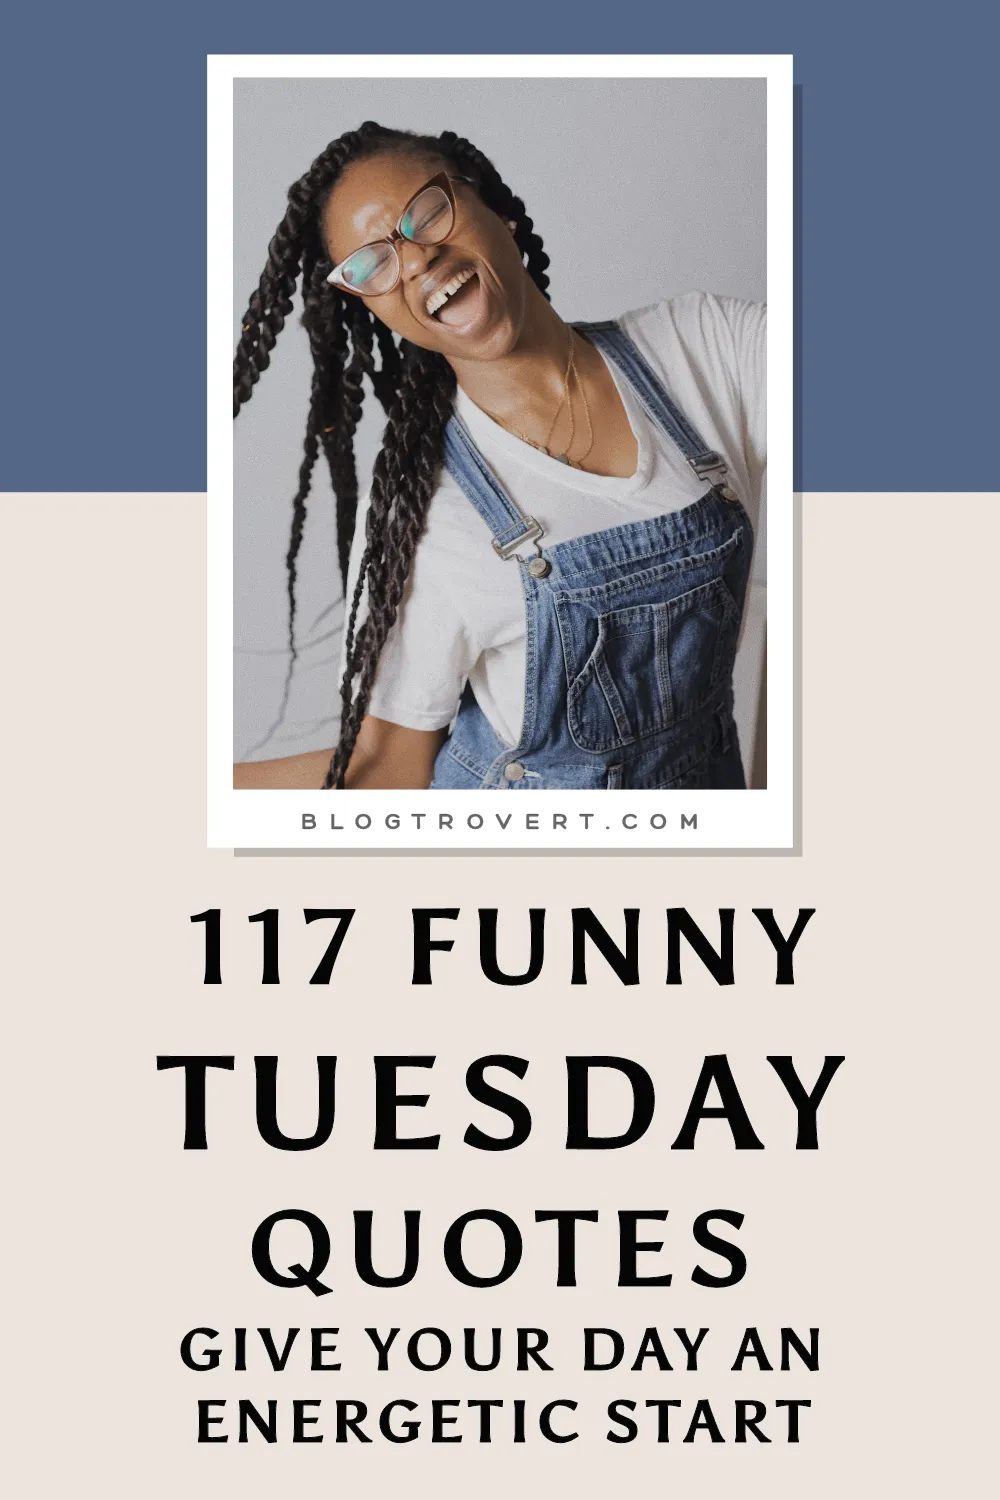 117 Funny Tuesday Quotes to Brighten Your Day 2